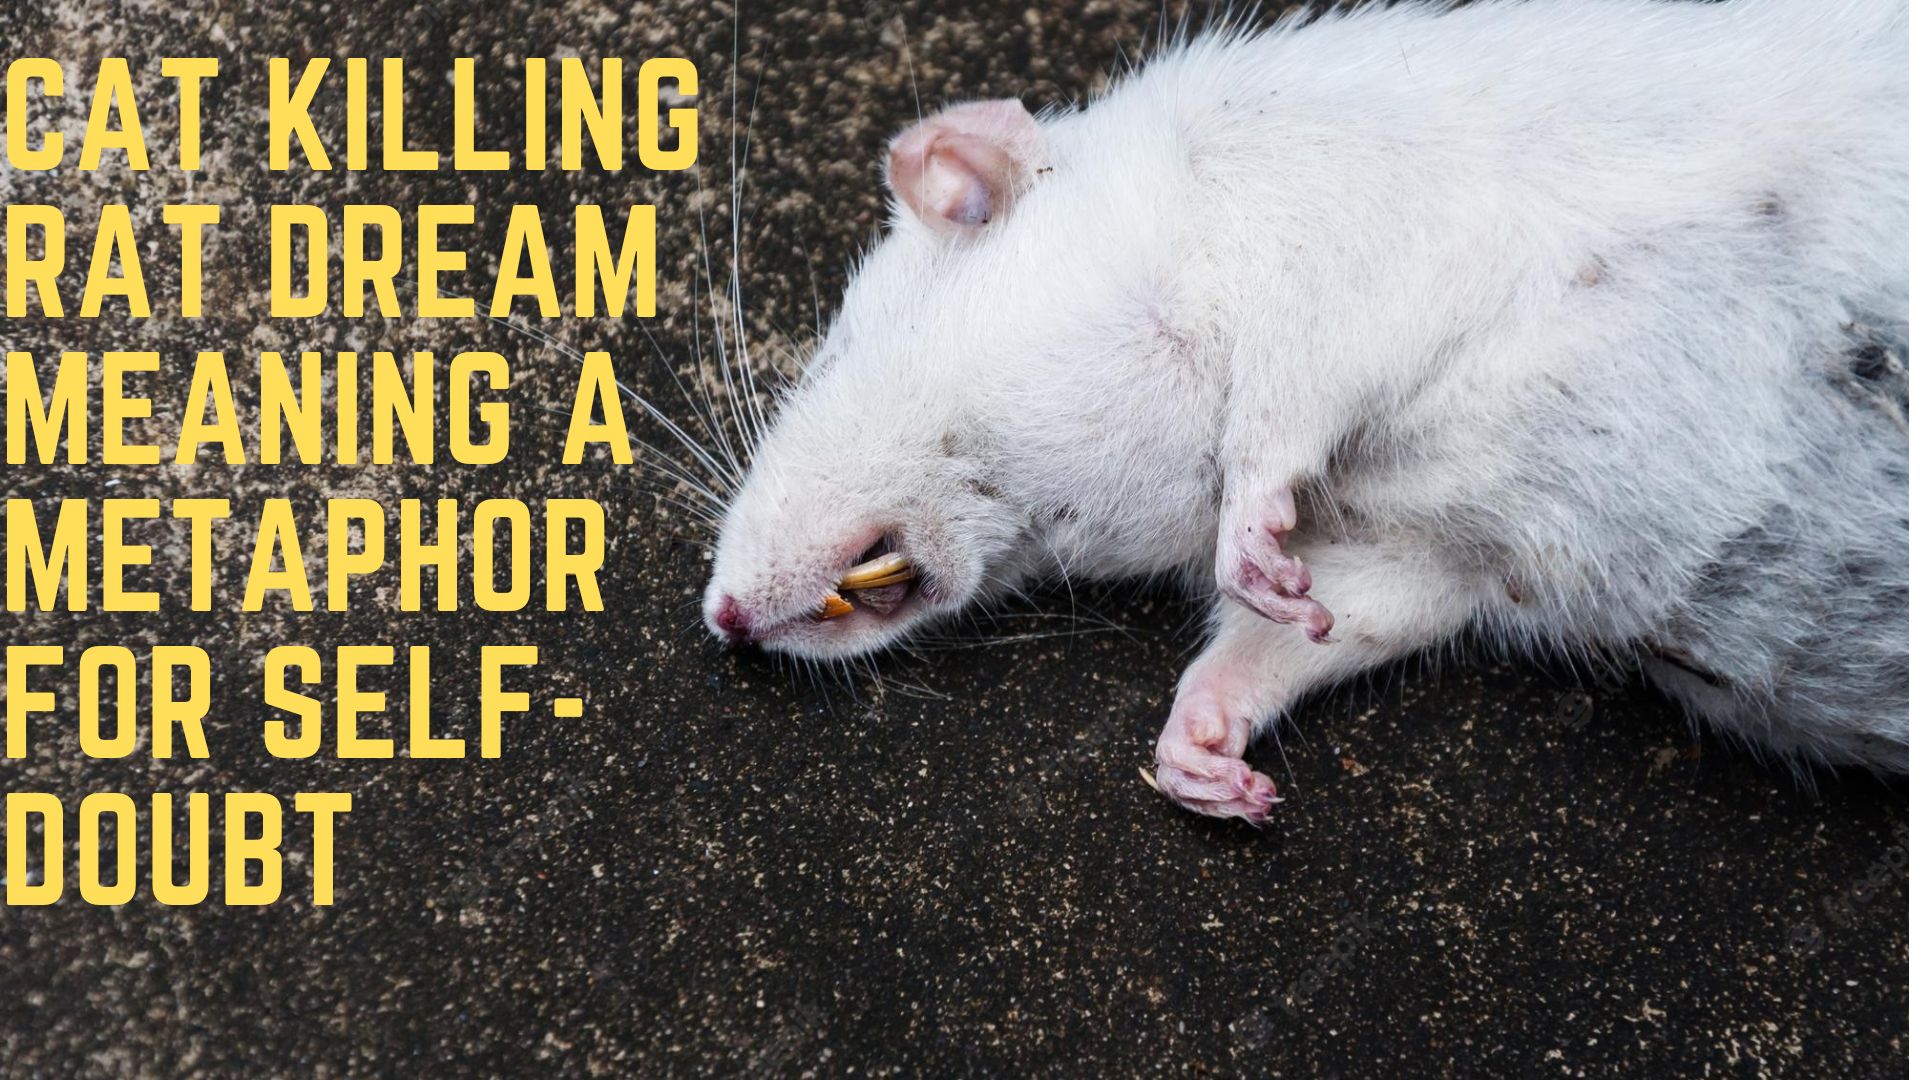 Cat Killing Rat Dream Meaning - A Metaphor For Self-Doubt